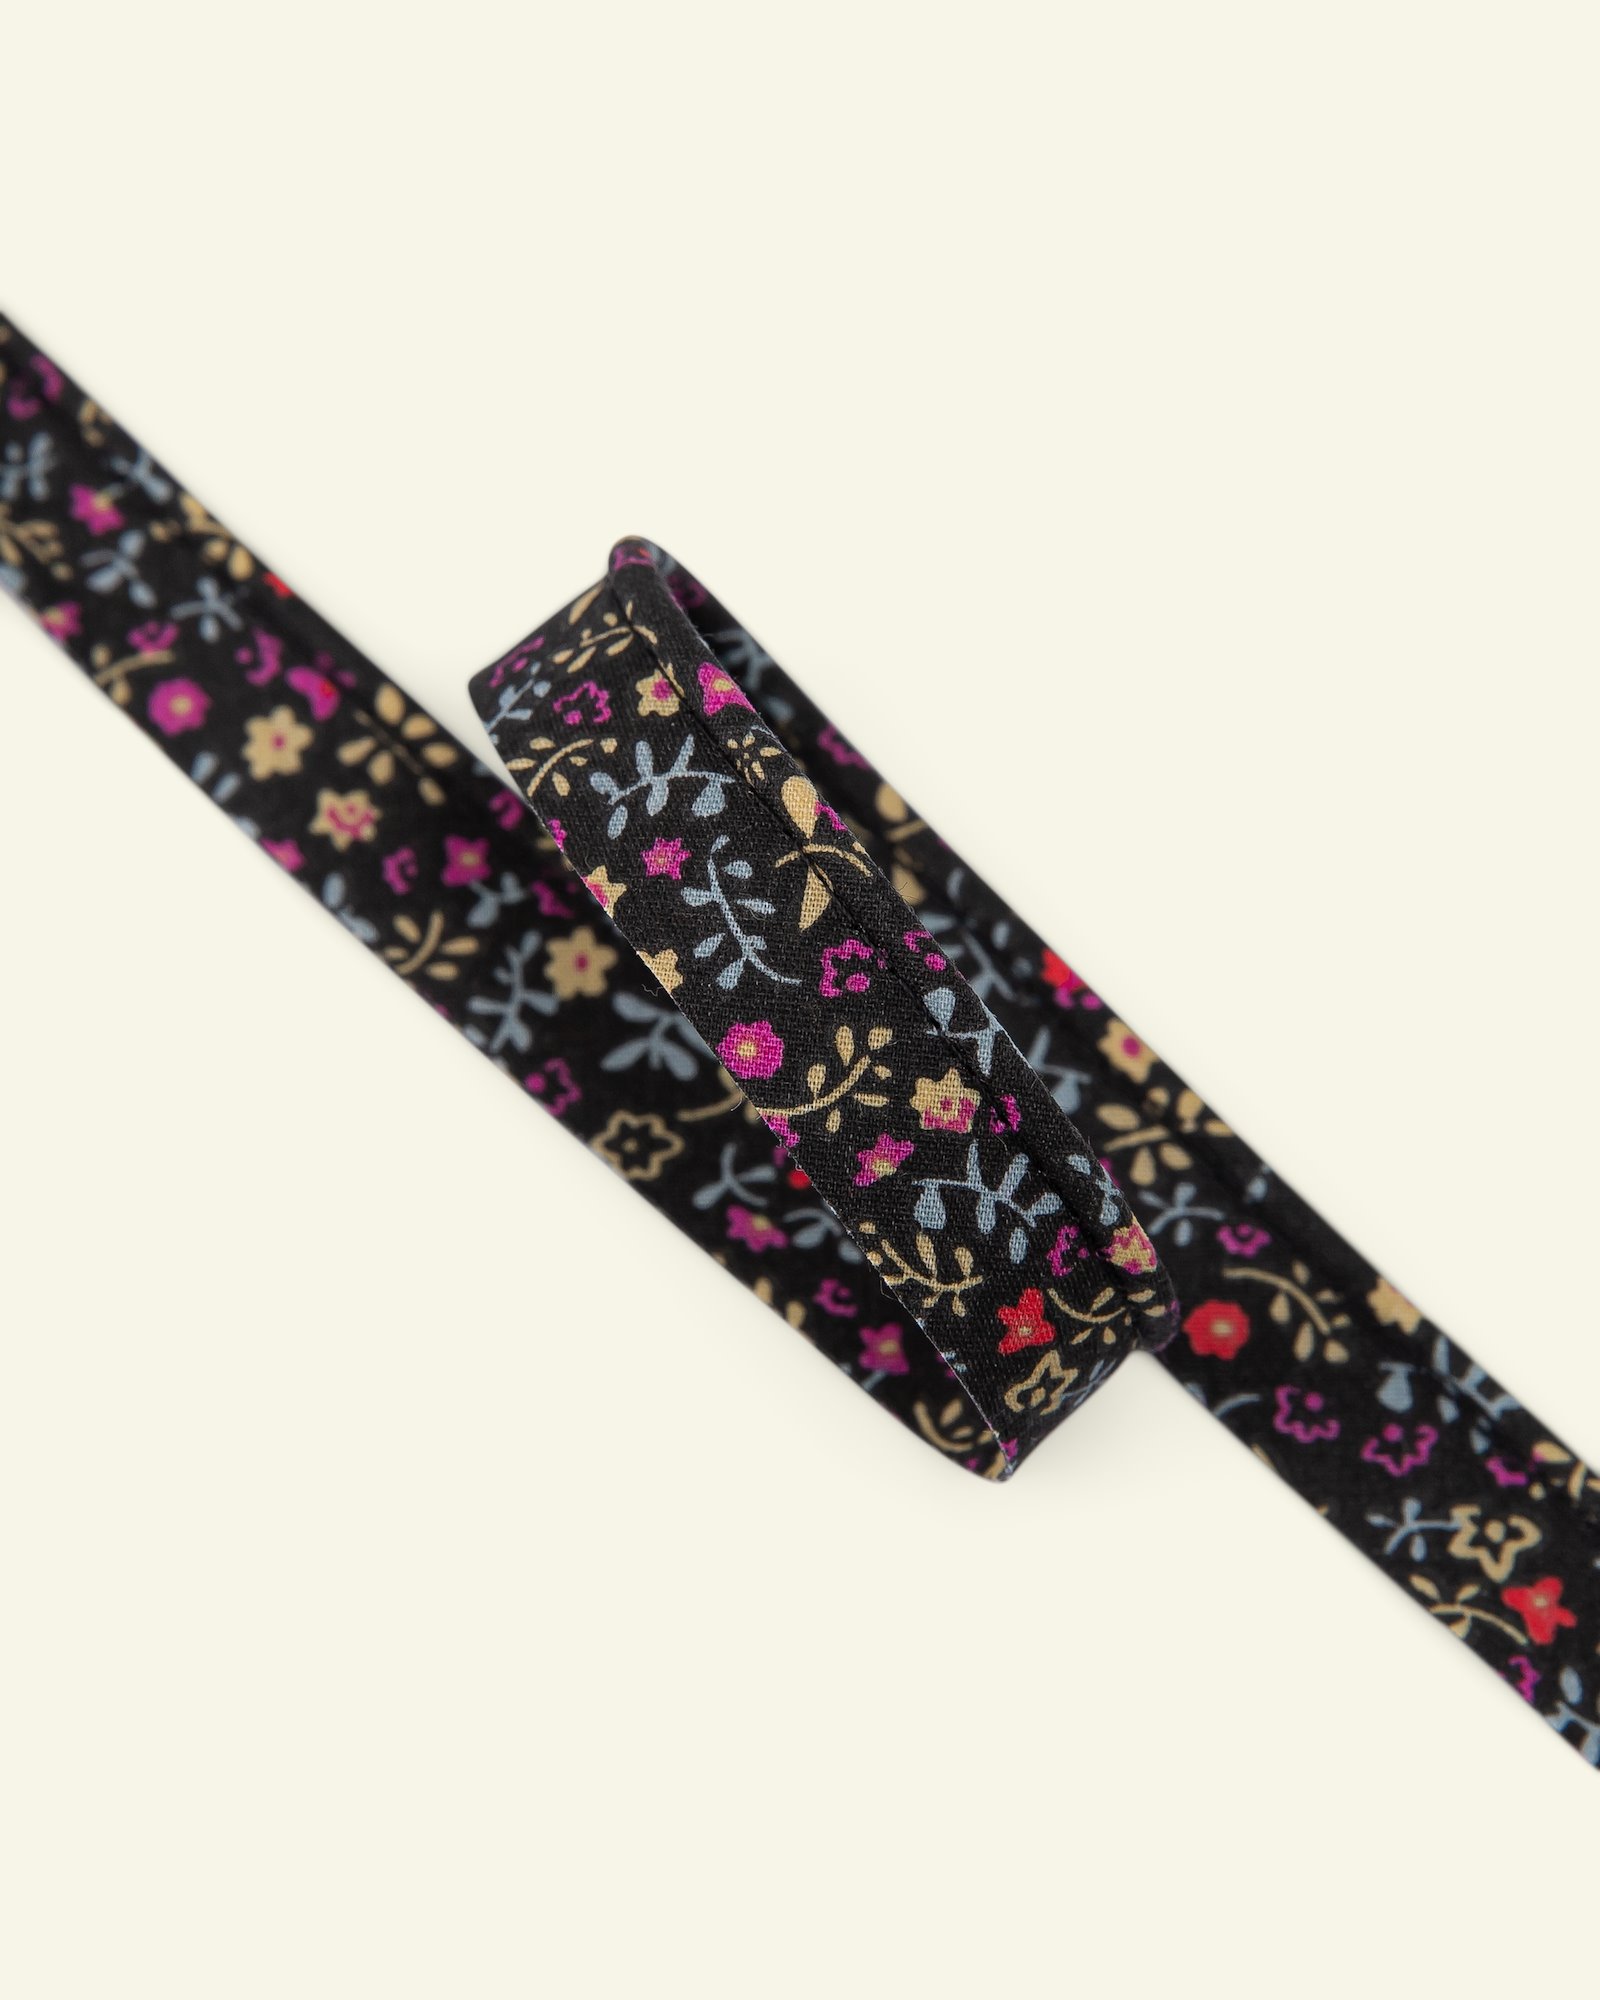 Pipingbånd blomster 4mm sort/gul/pink 3m 22329_pack